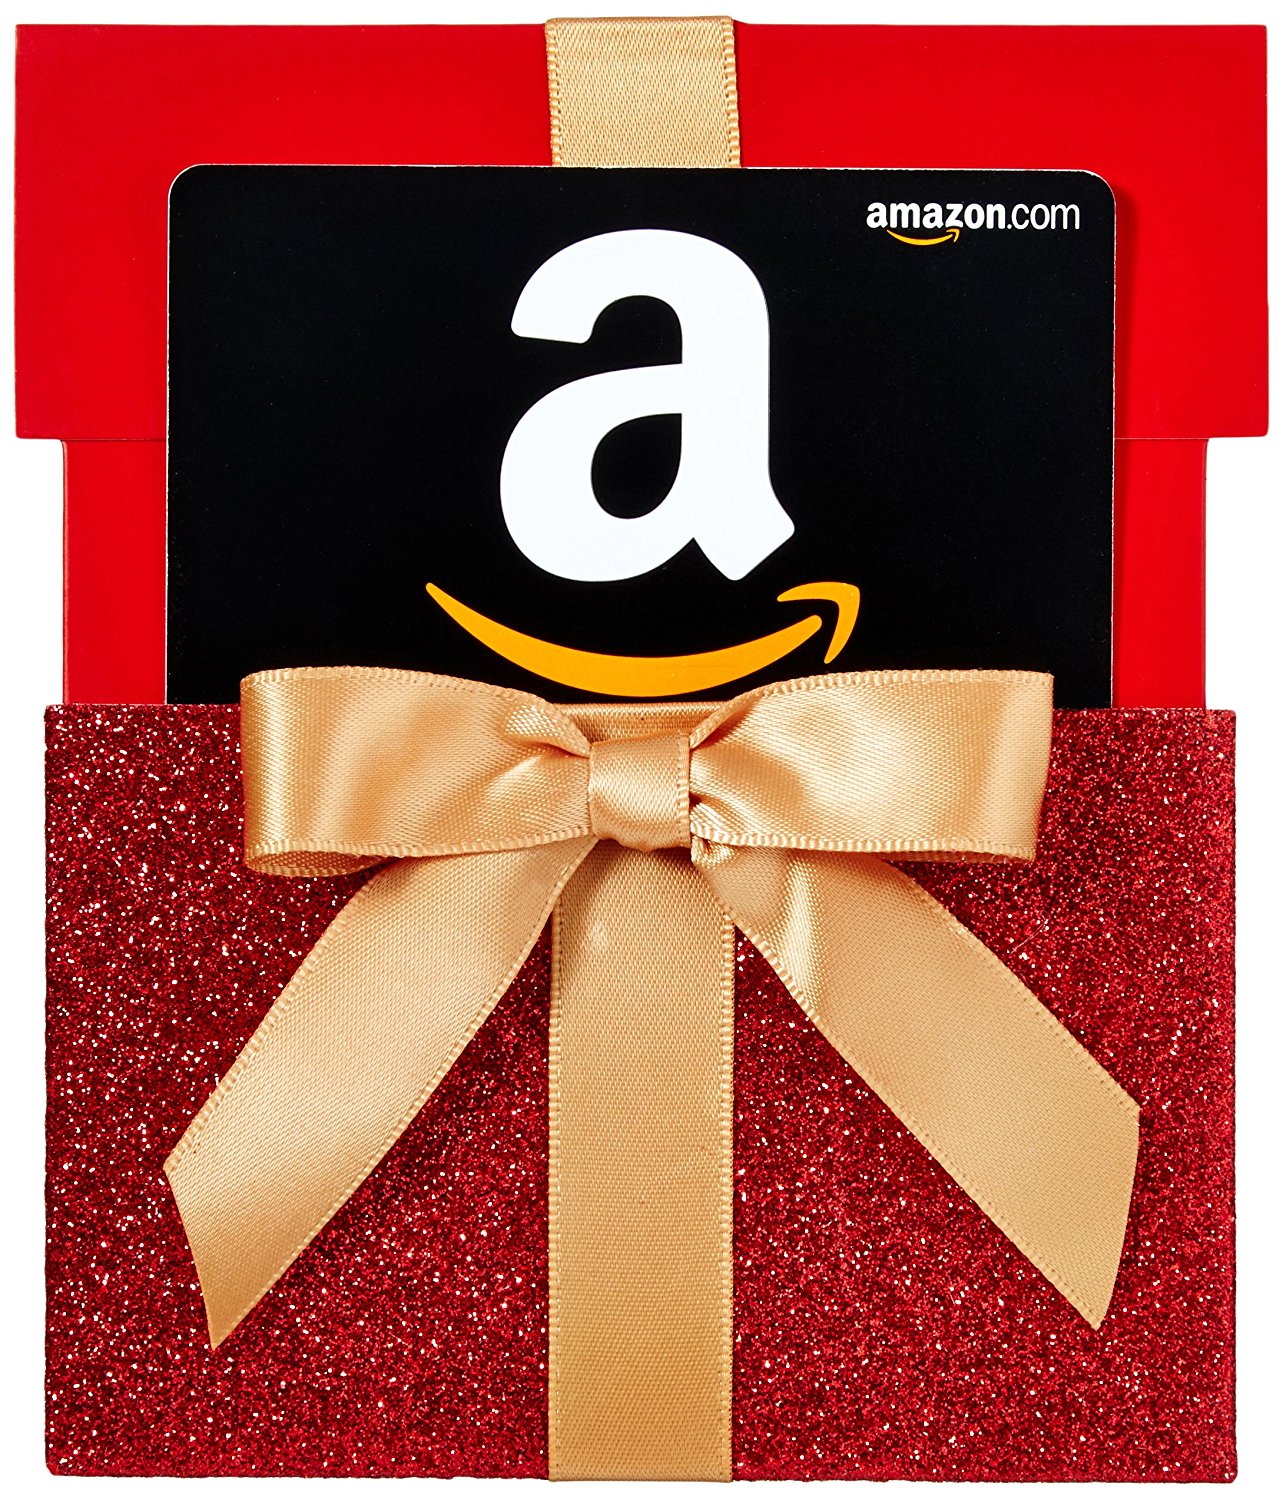 how-to-get-amazon-gift-cards-free-2019-150-amazon-gift-card-giveaway